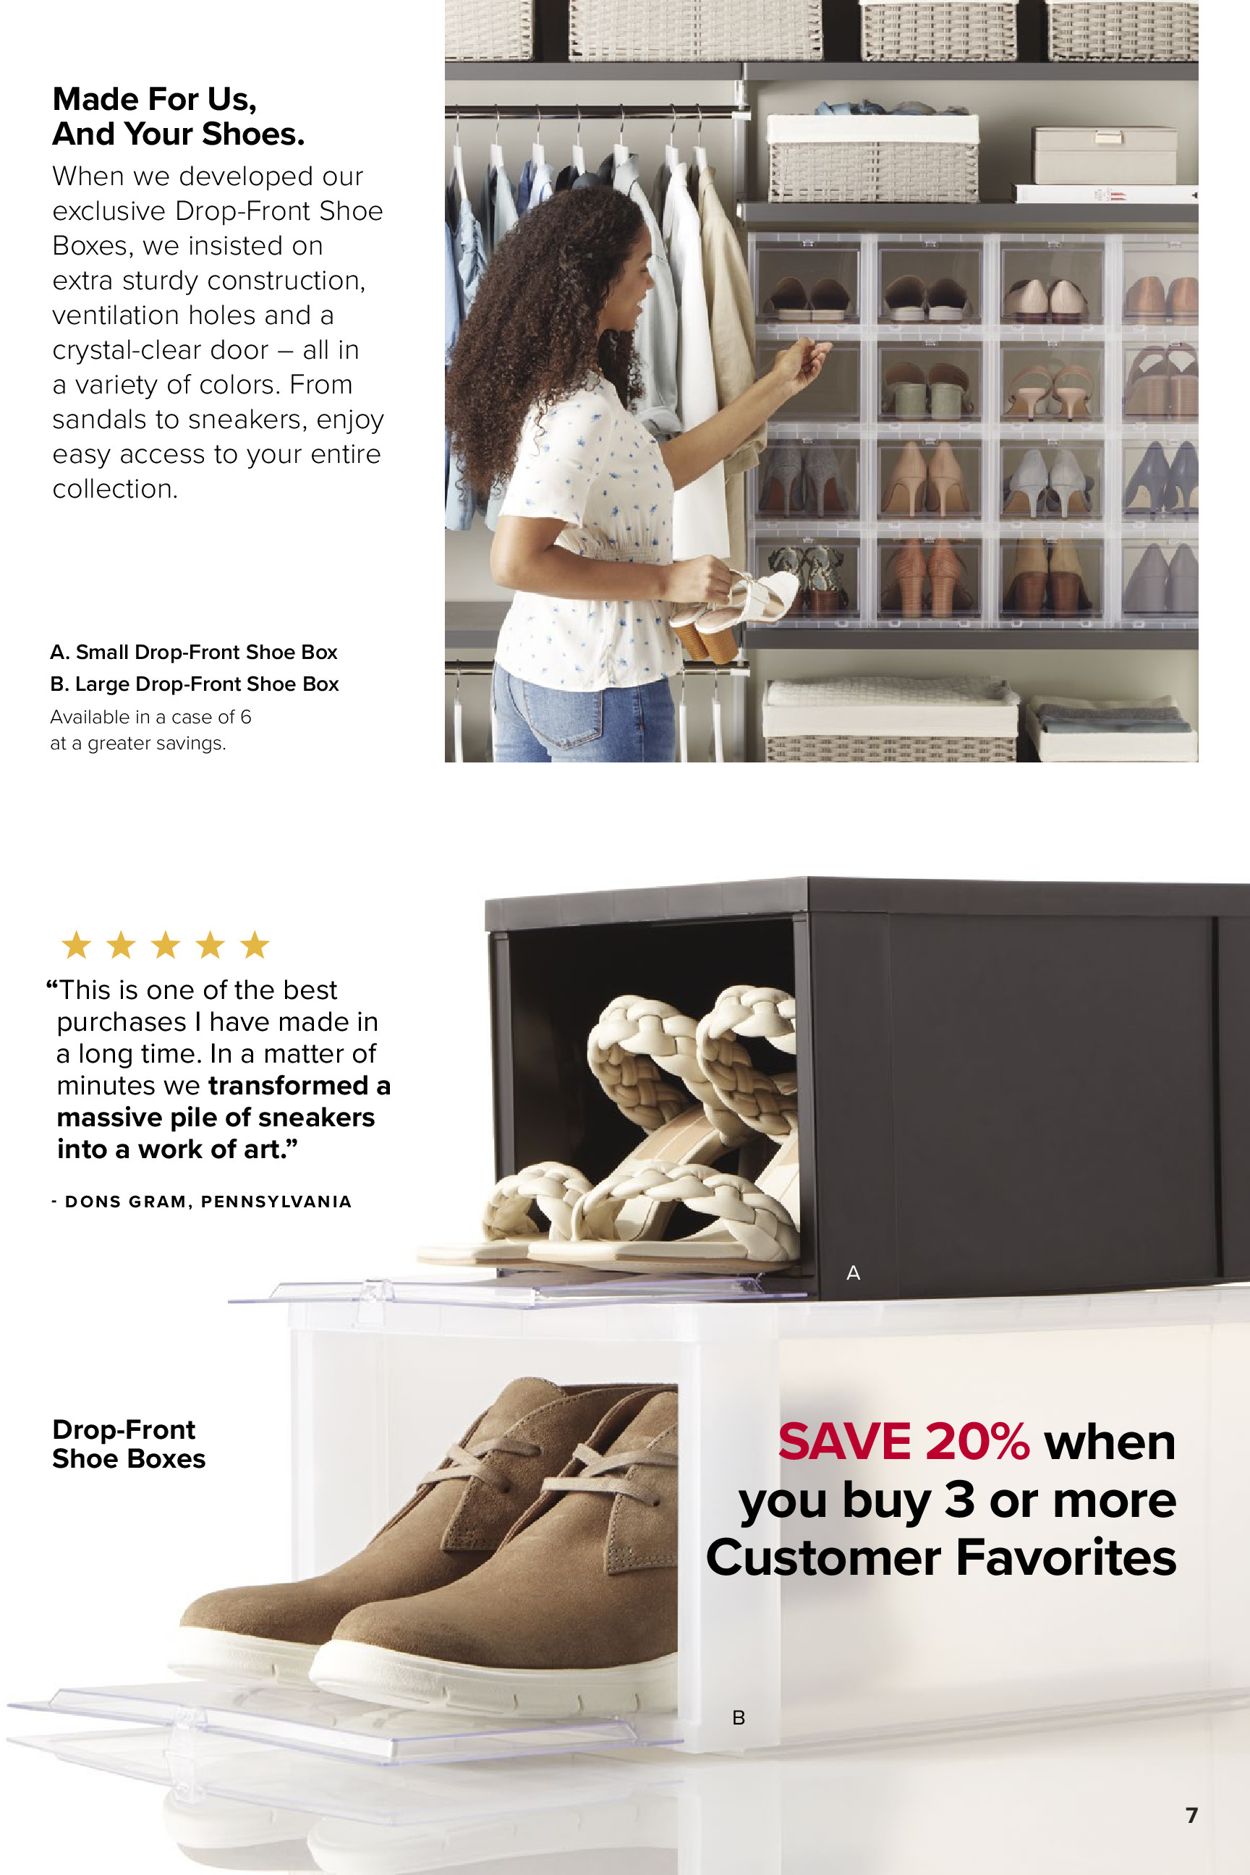 The Container Store Ad from 07/19/2021